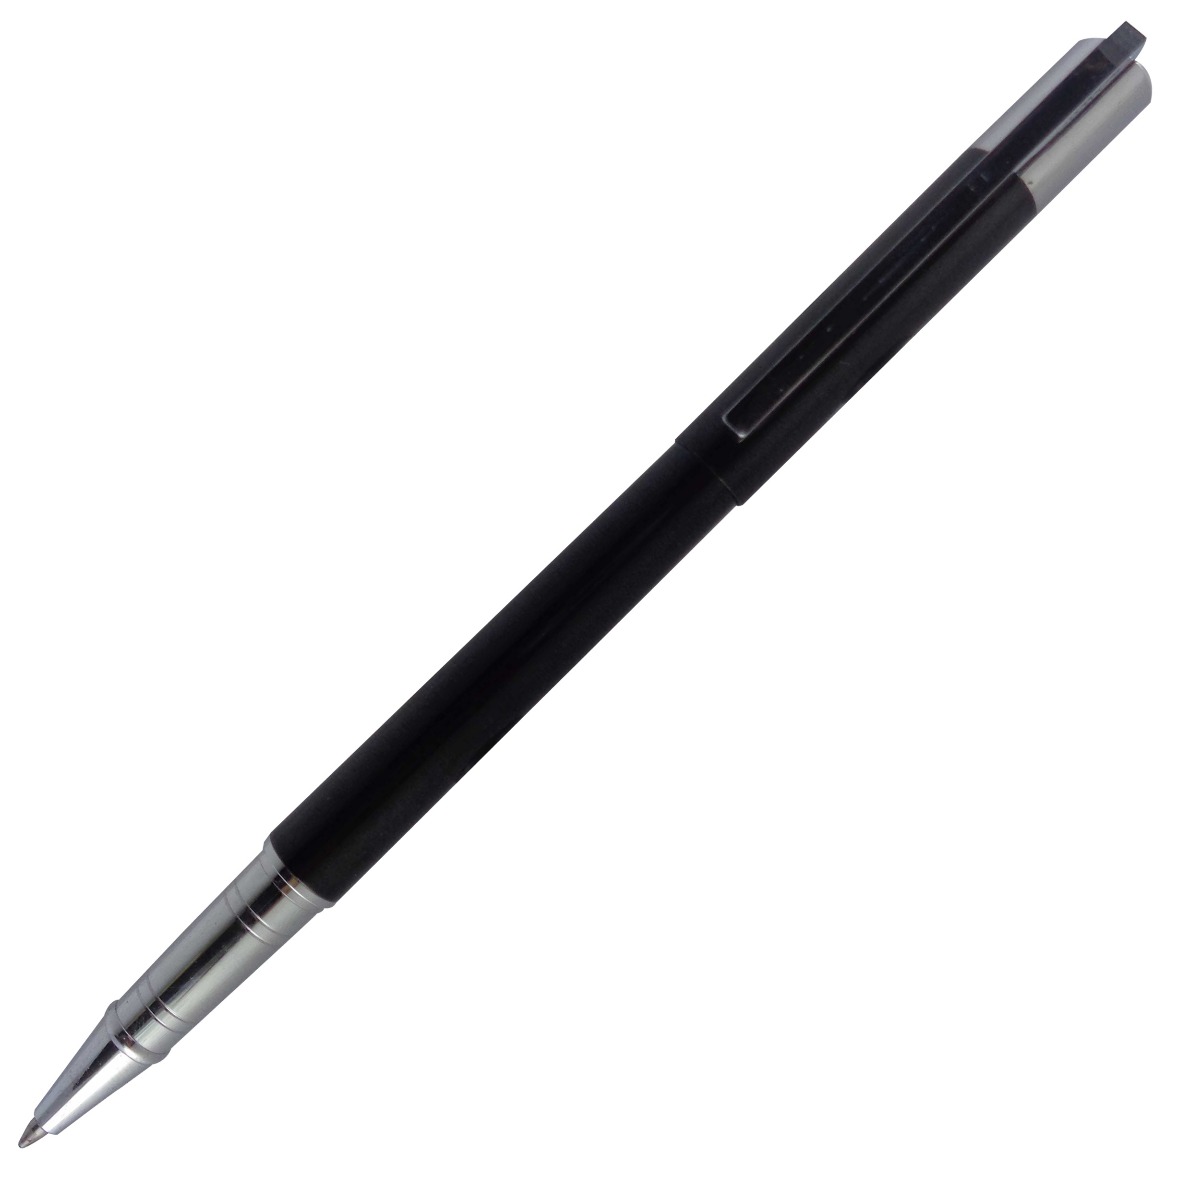 JINHAO MODEL: 14418 BLACK COLOR BODY WITH SILVER CLIP MEDIUM TIP CAP TYPE ROLLER BALL